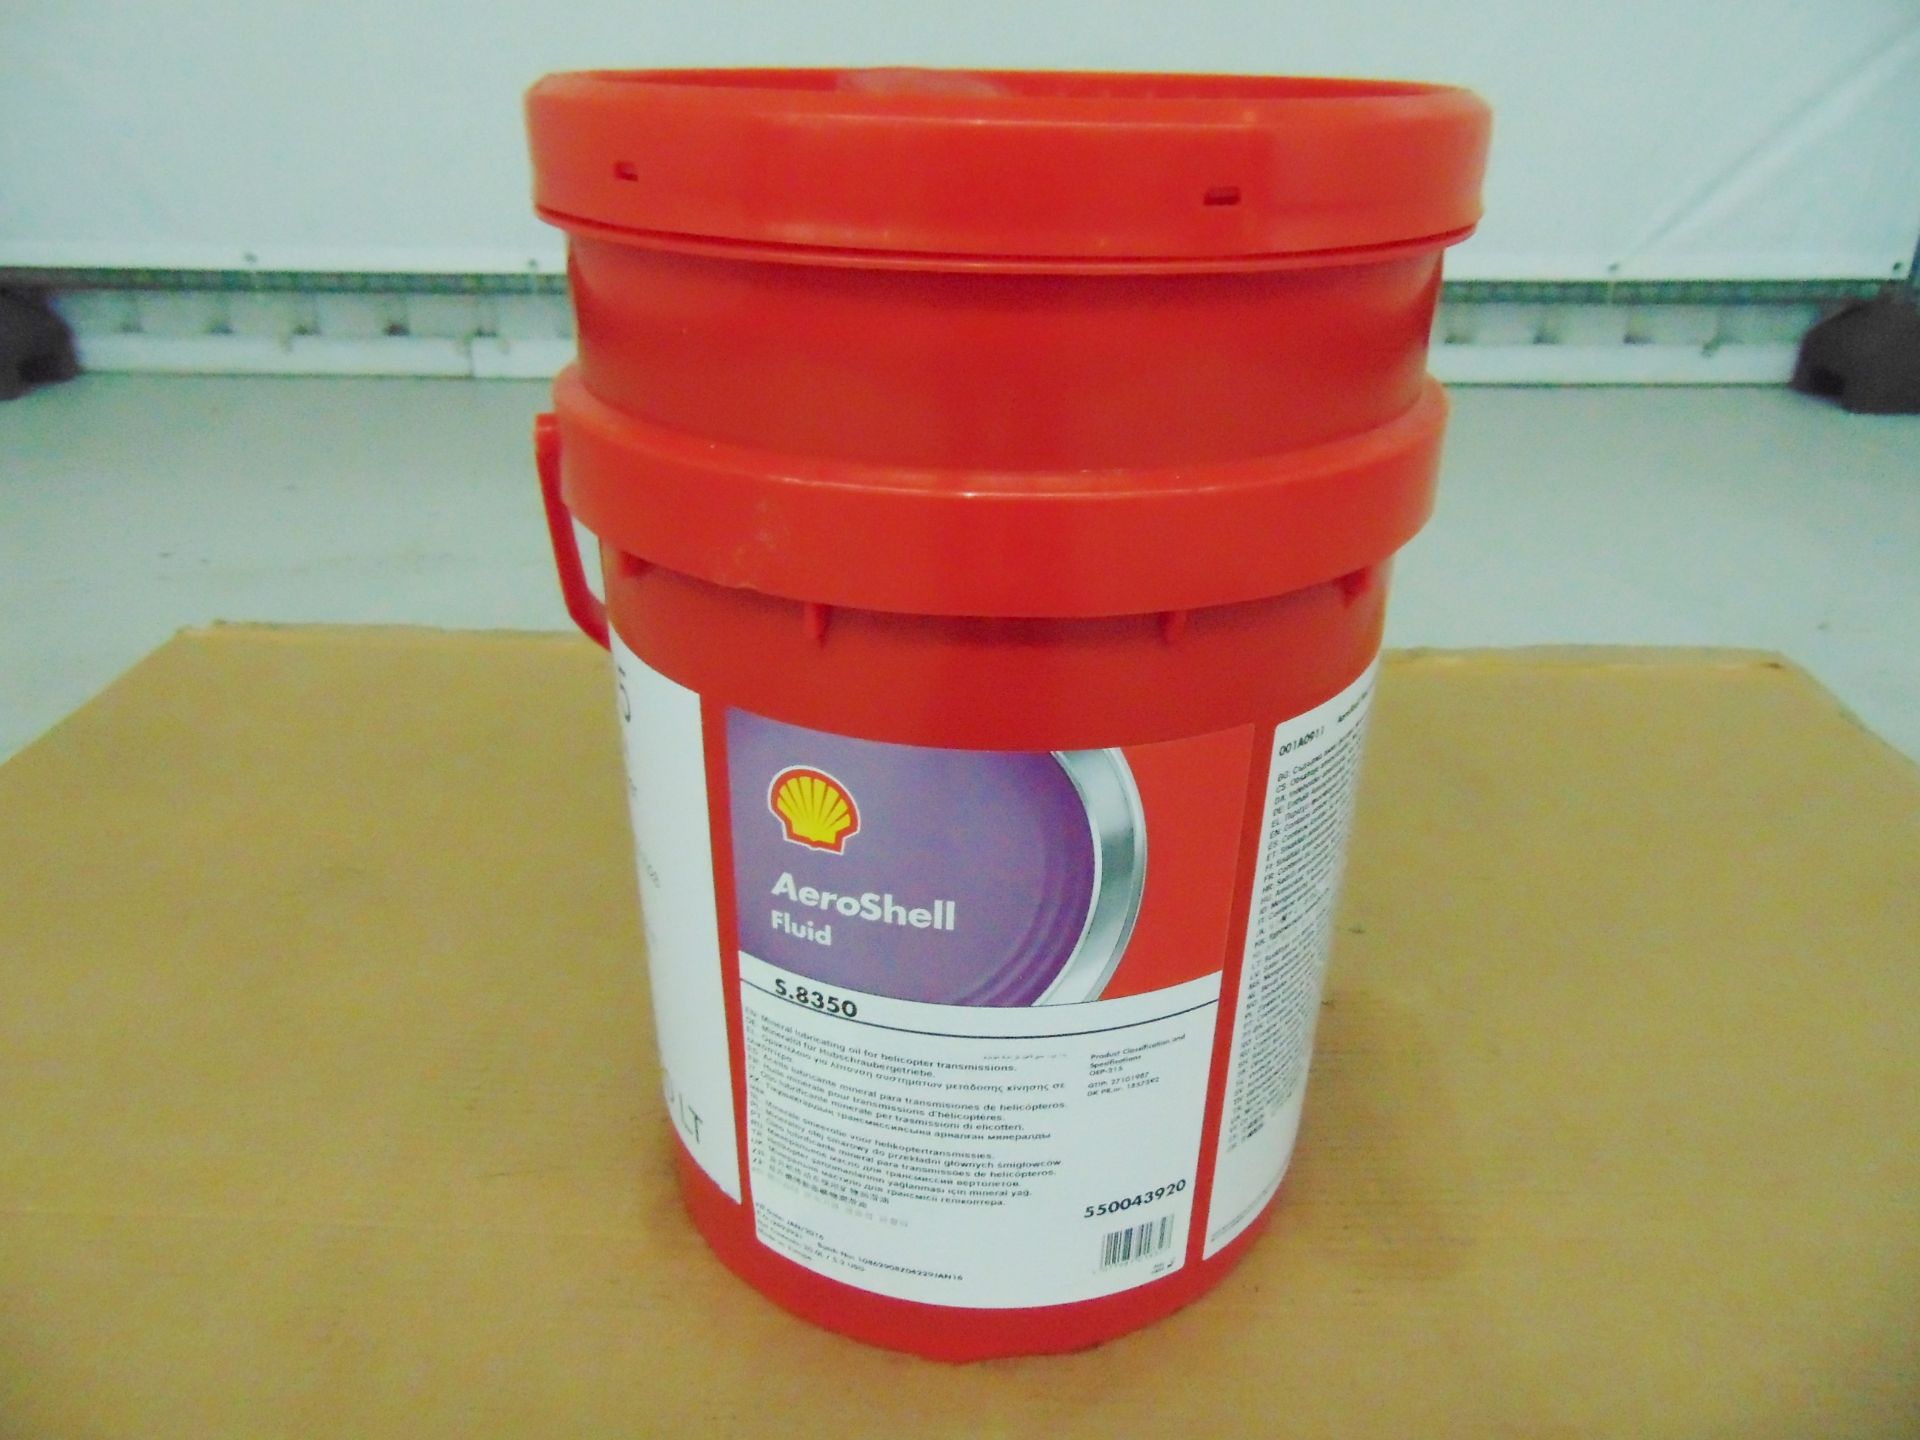 1 x Unissued 20L Drum of Aeroshell S.8350 Helicopter Lubricating Oil - Image 2 of 4